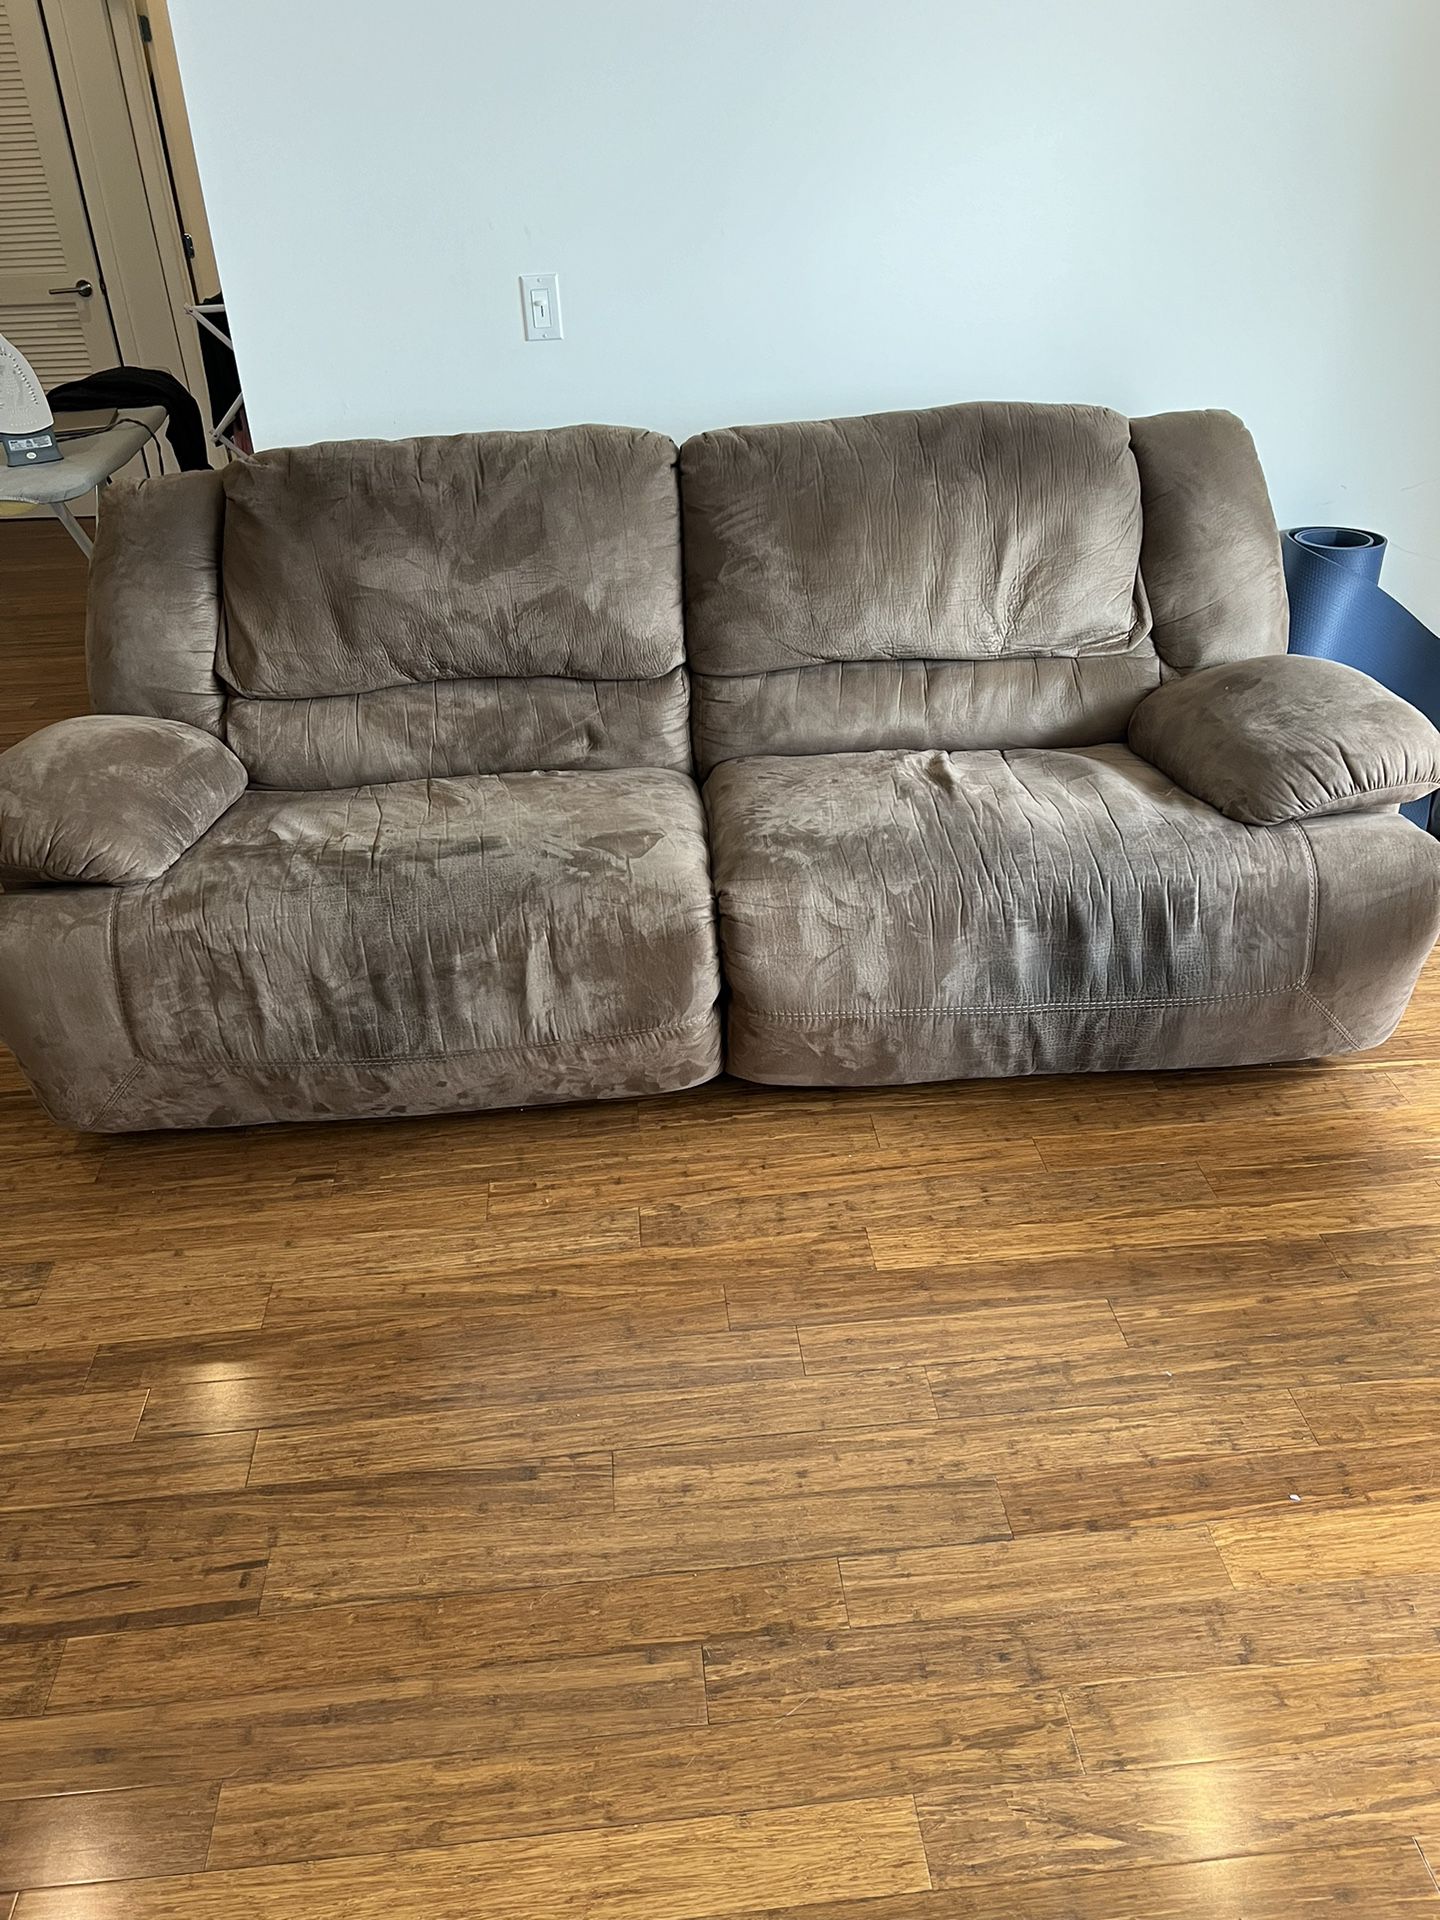 FREE Comfortable Cushiony 7.5 FT Recliner 